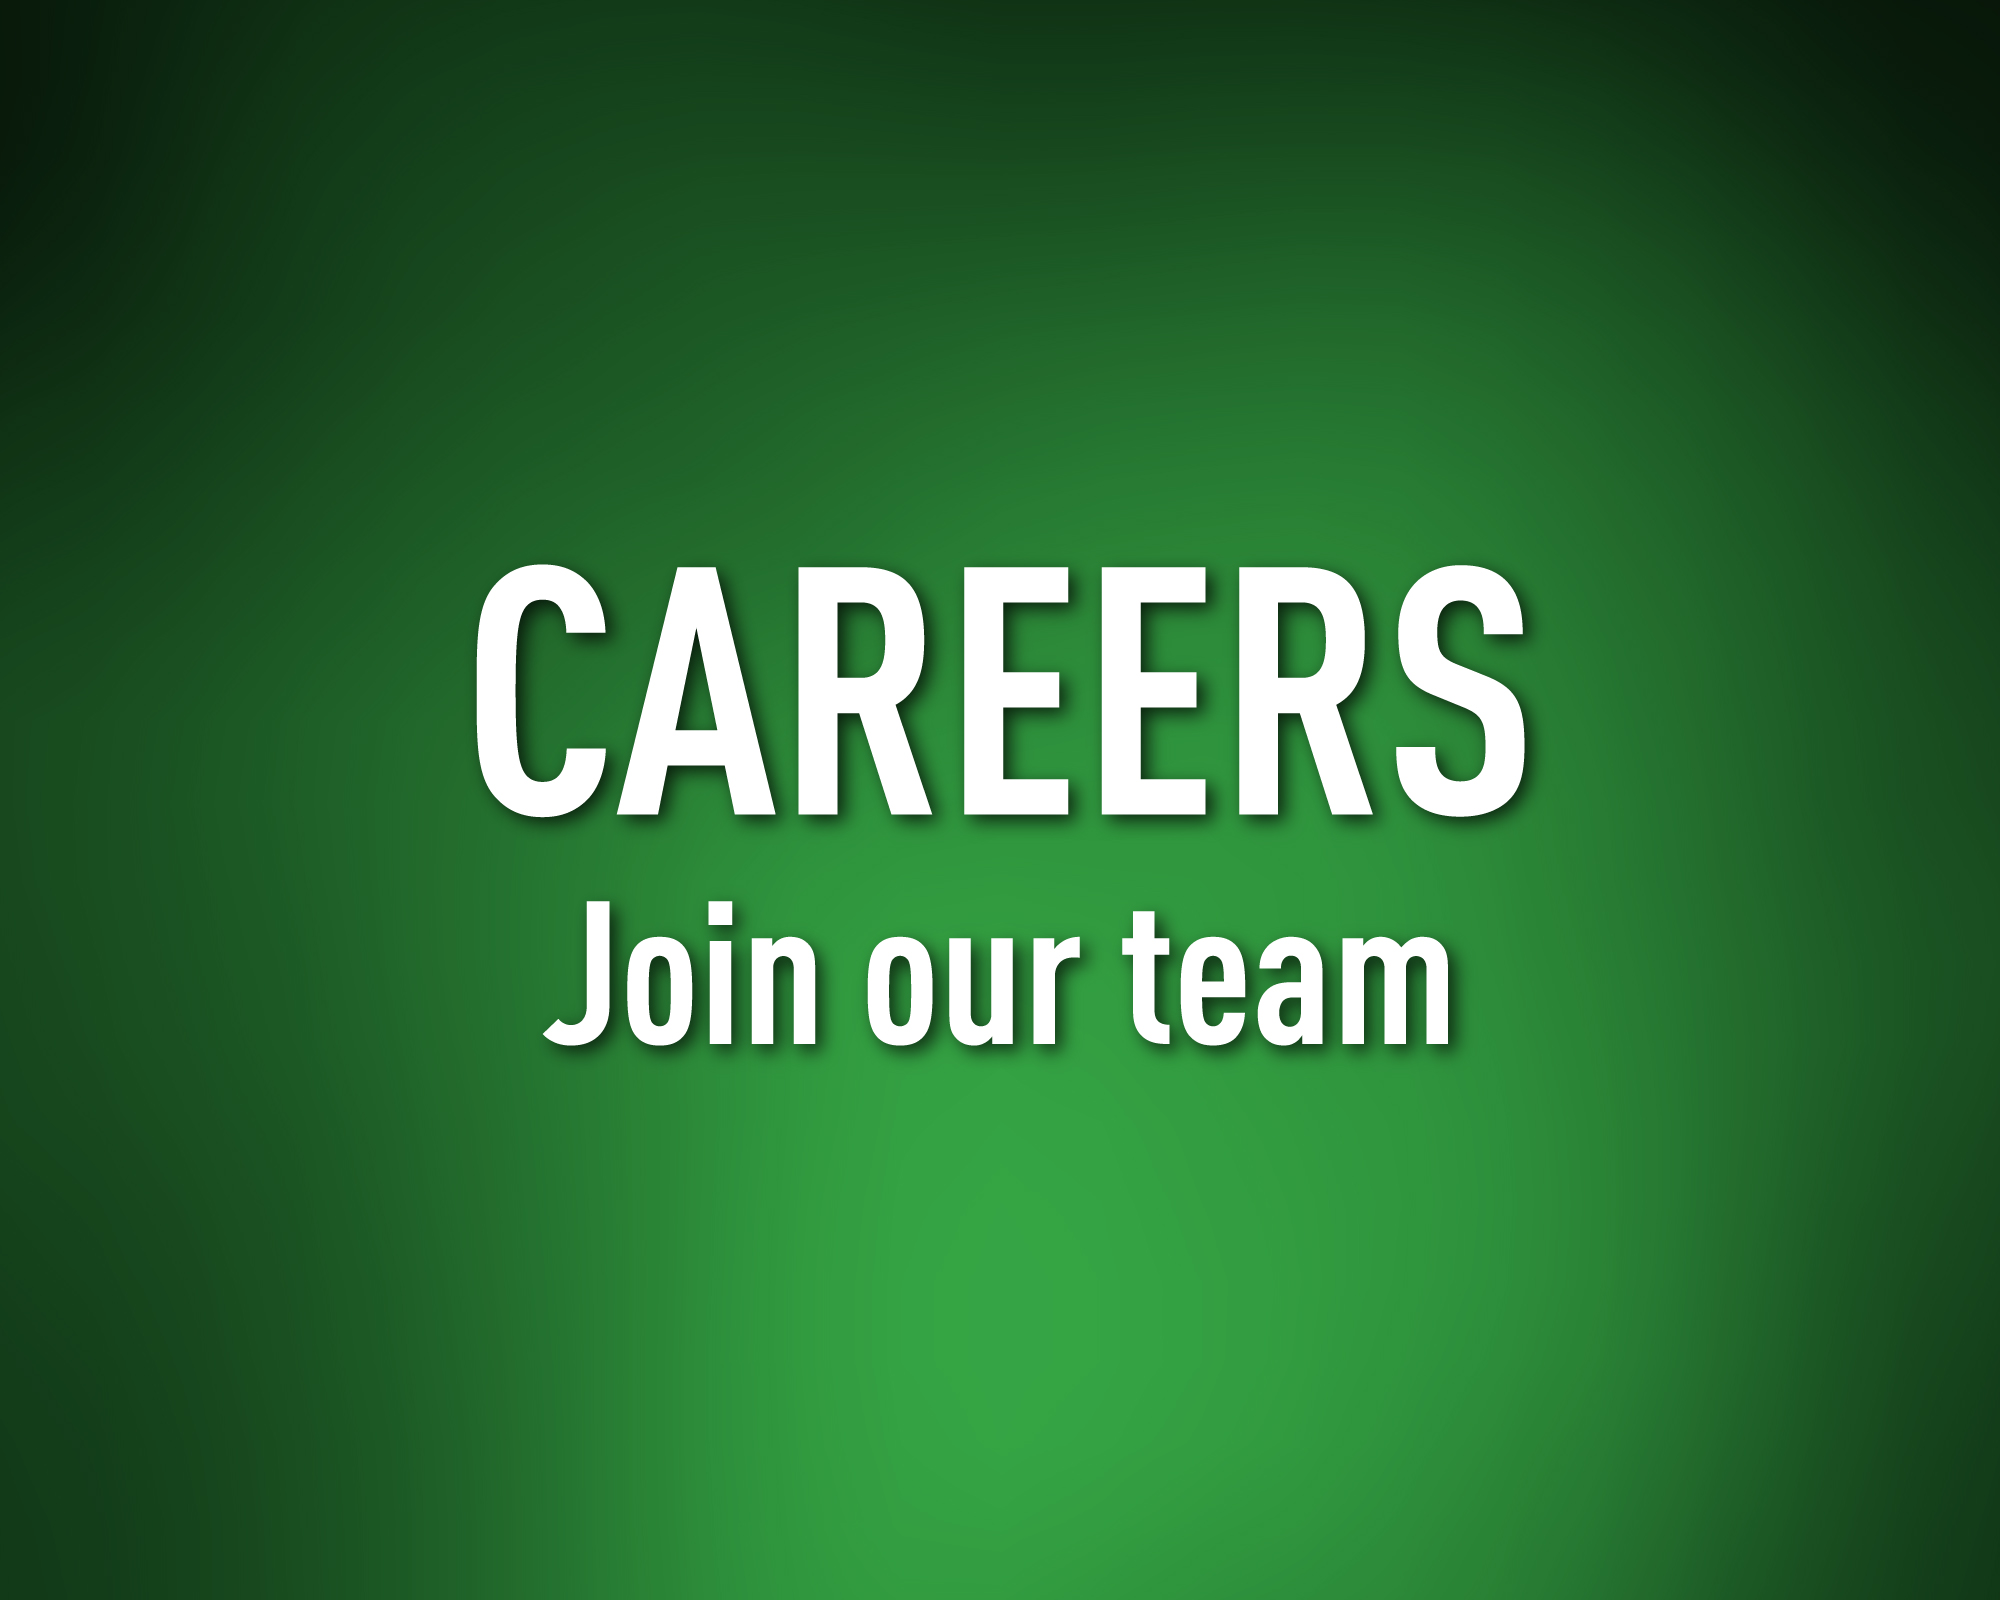 Careers. Join our team